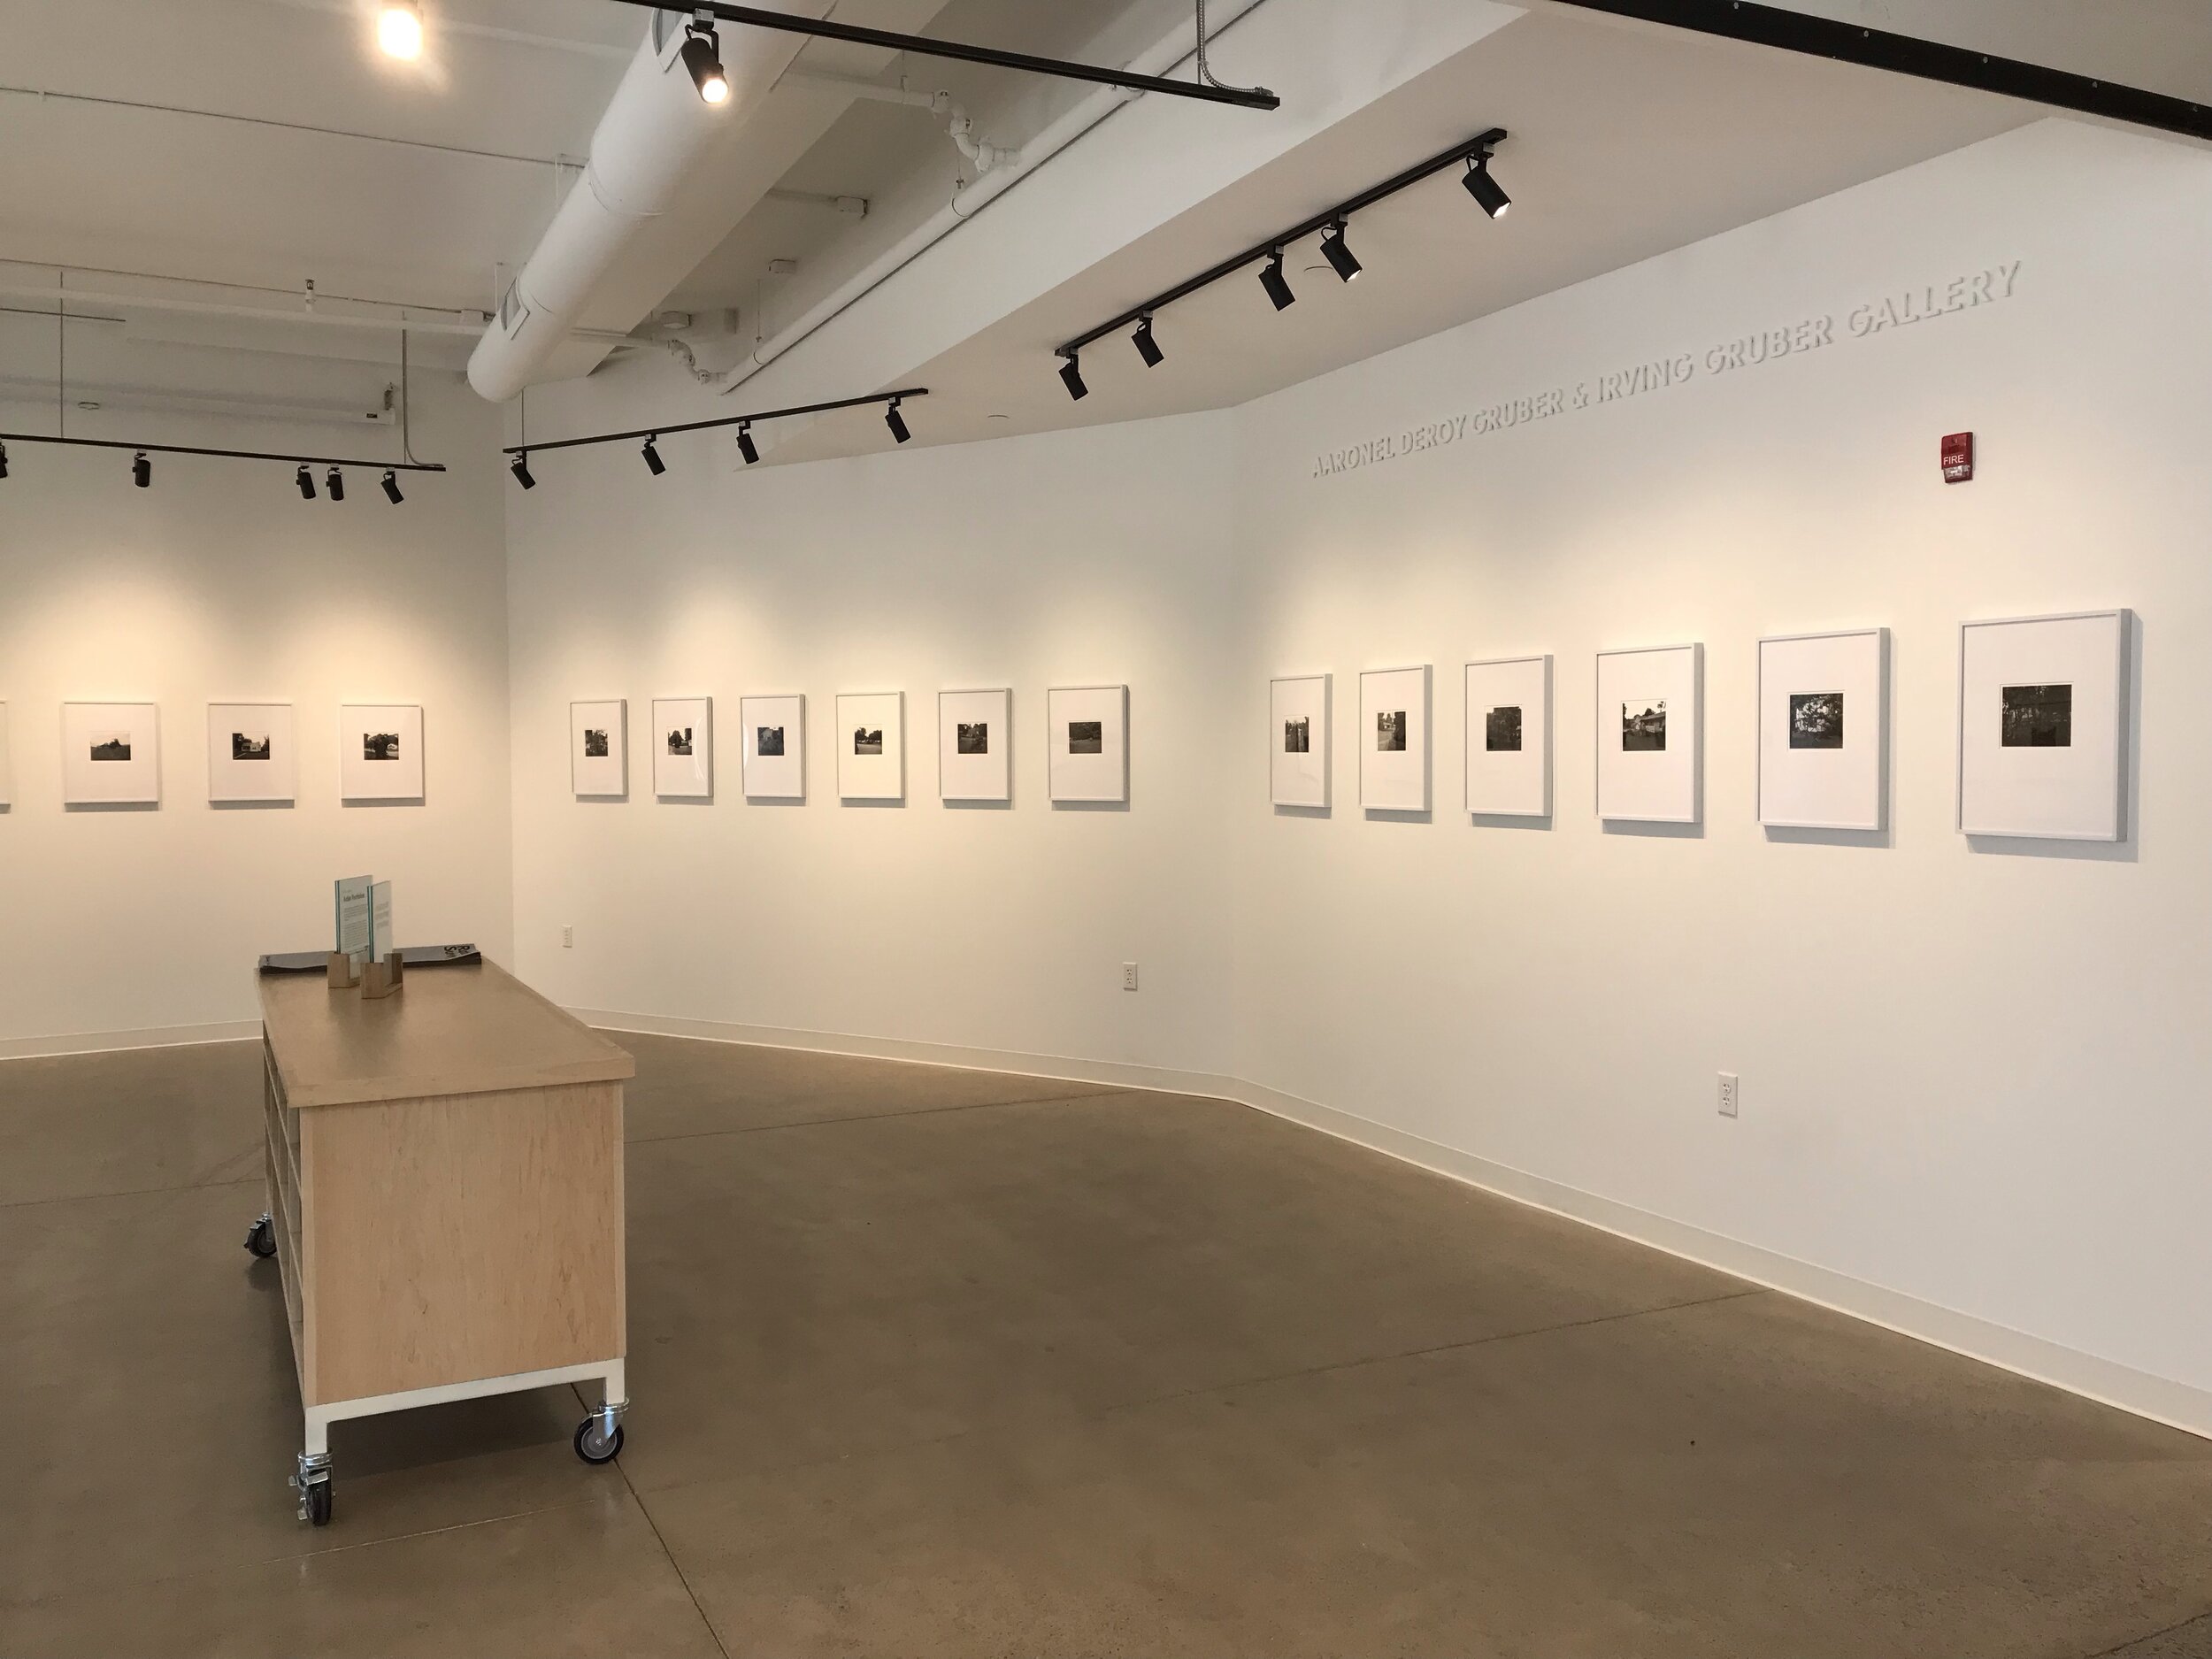  Installation of “The ancien regime” at Silver Eye Center for Photography, Pittsburgh, Pennsylvania.  